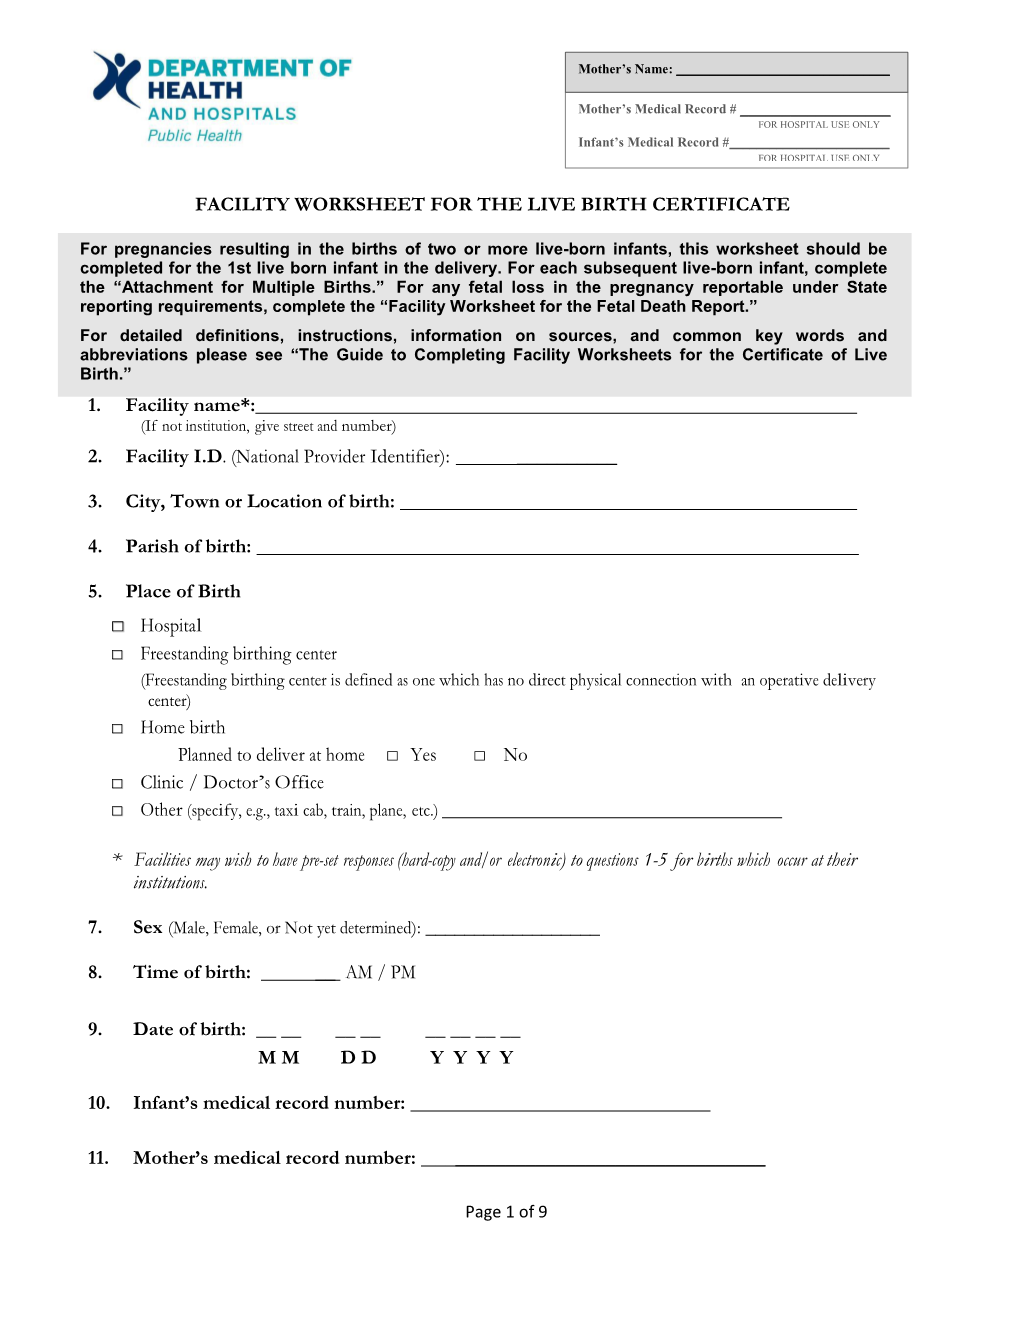 Facility Worksheet for the Live Birth Certificate-Final